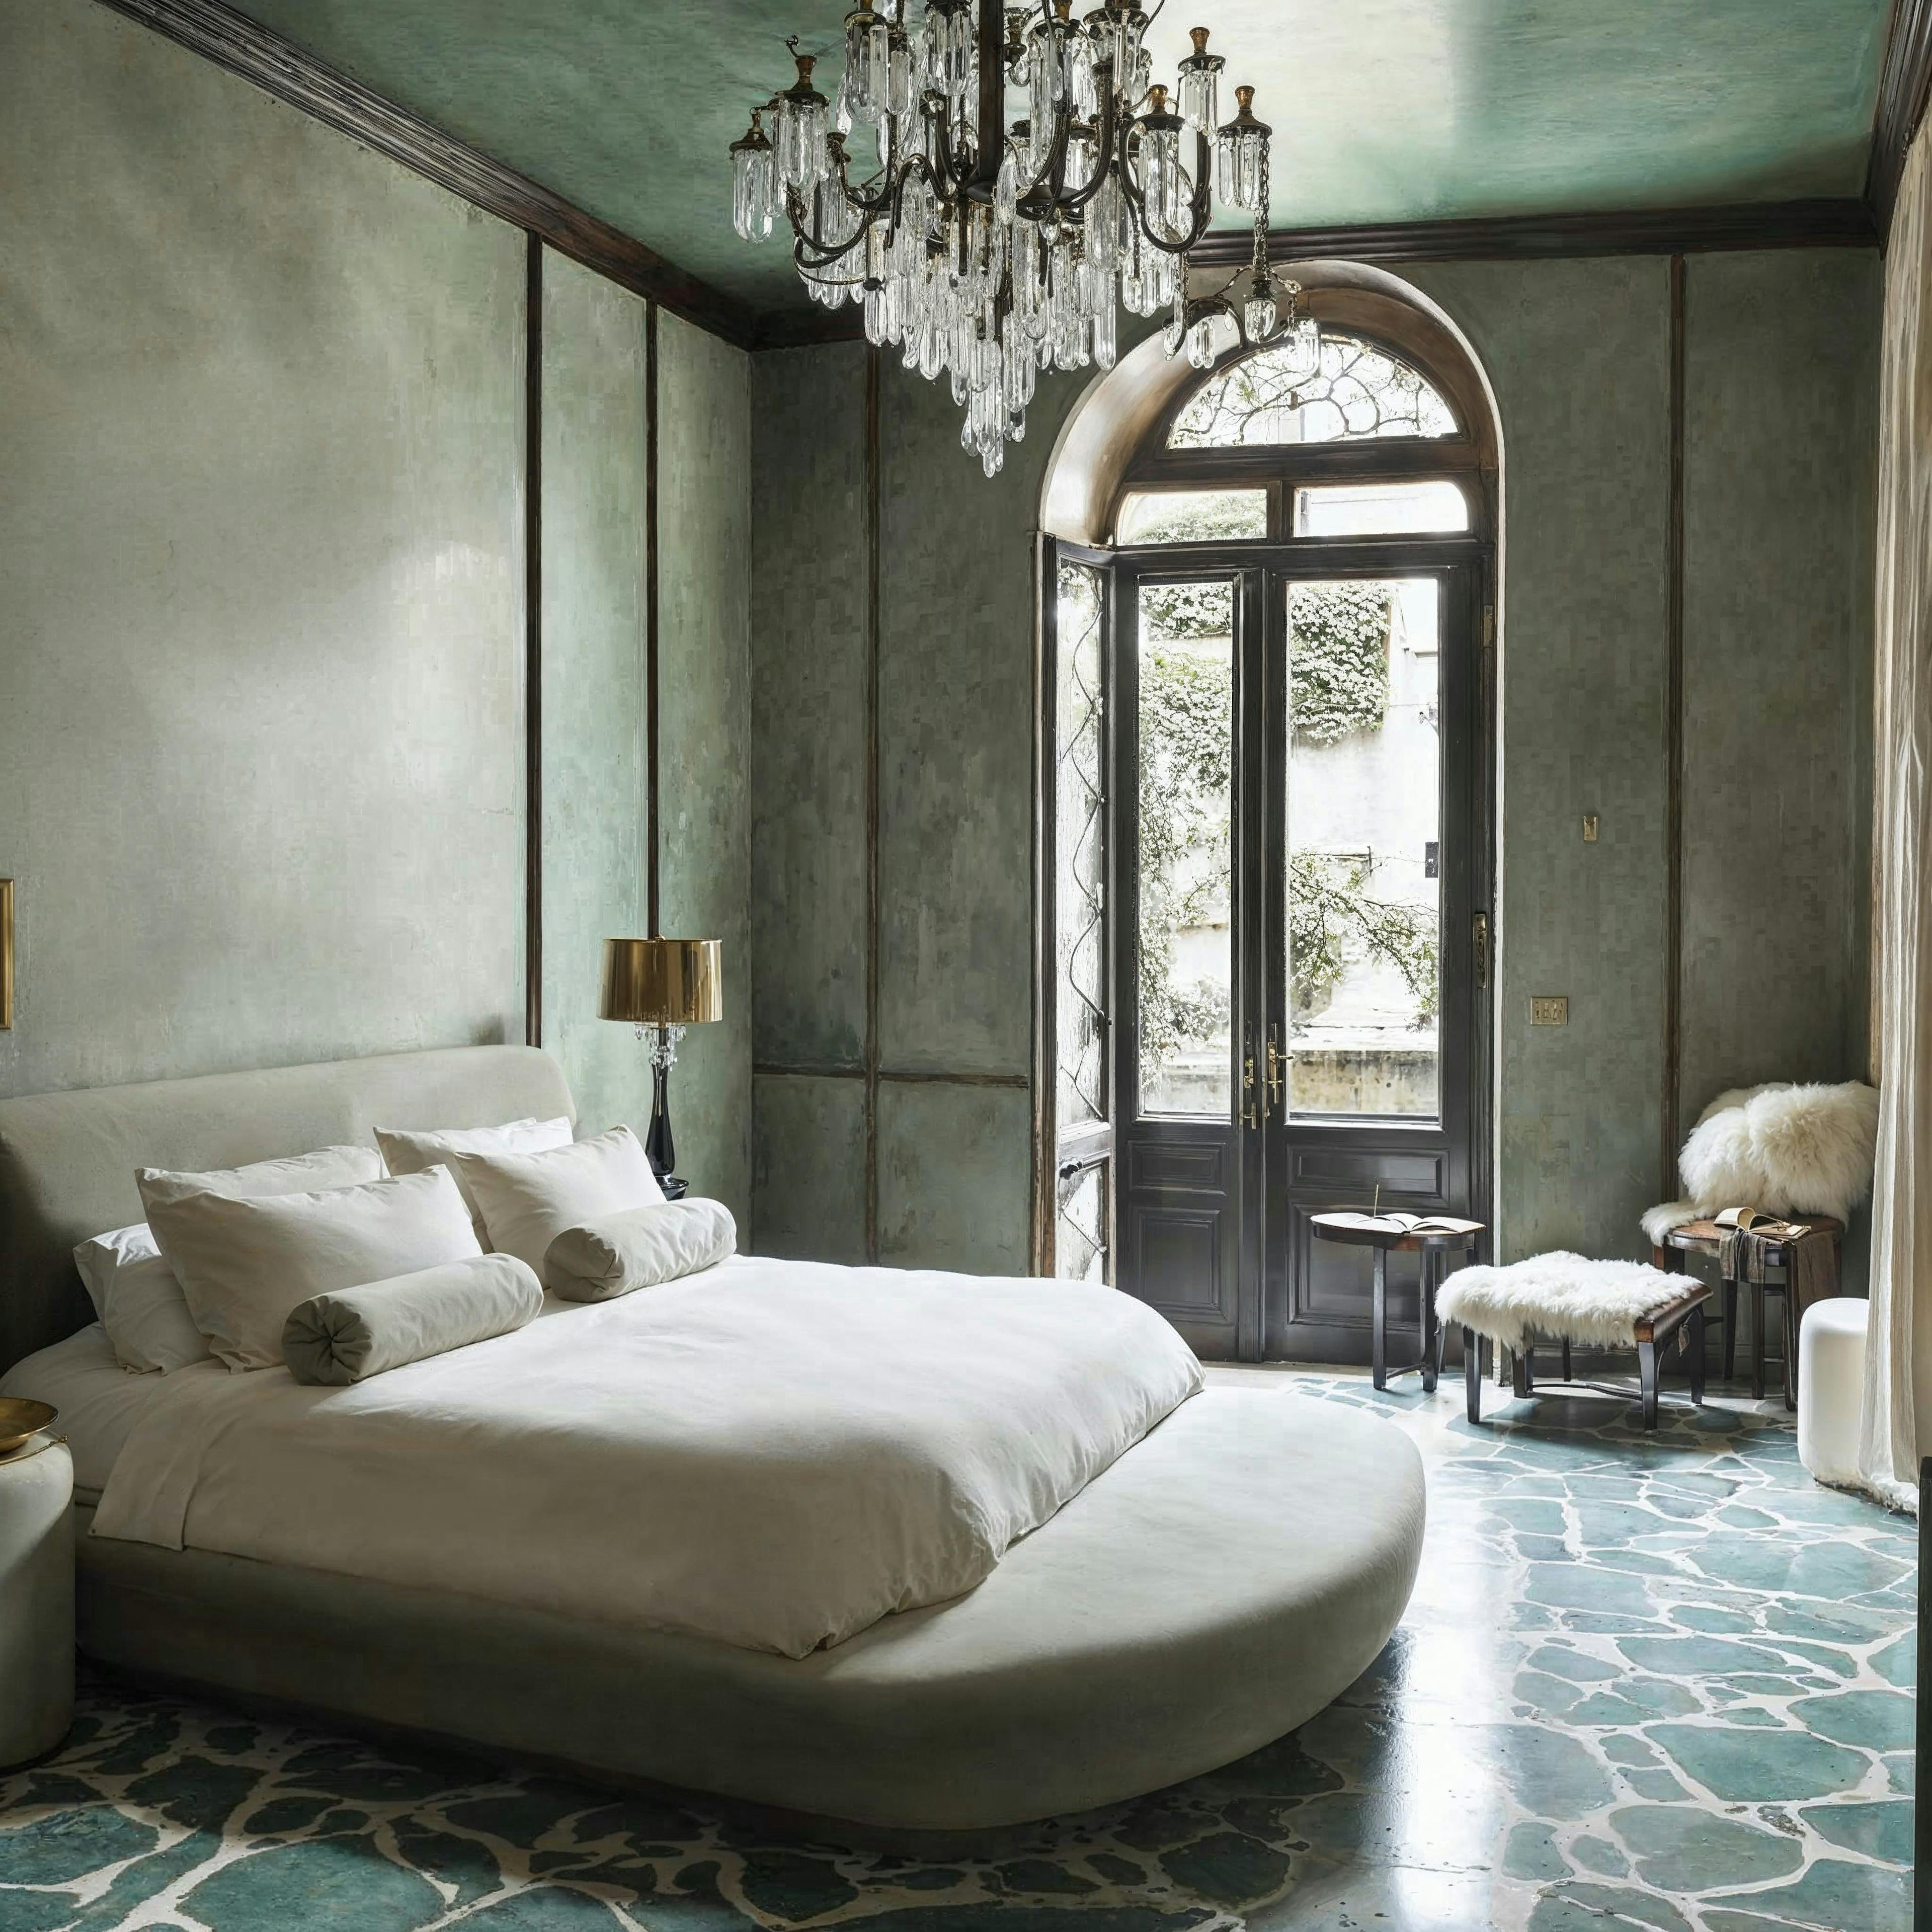  What if we imagine a Scene with a bedroom that whispers the story of Murano's timeless elegance?